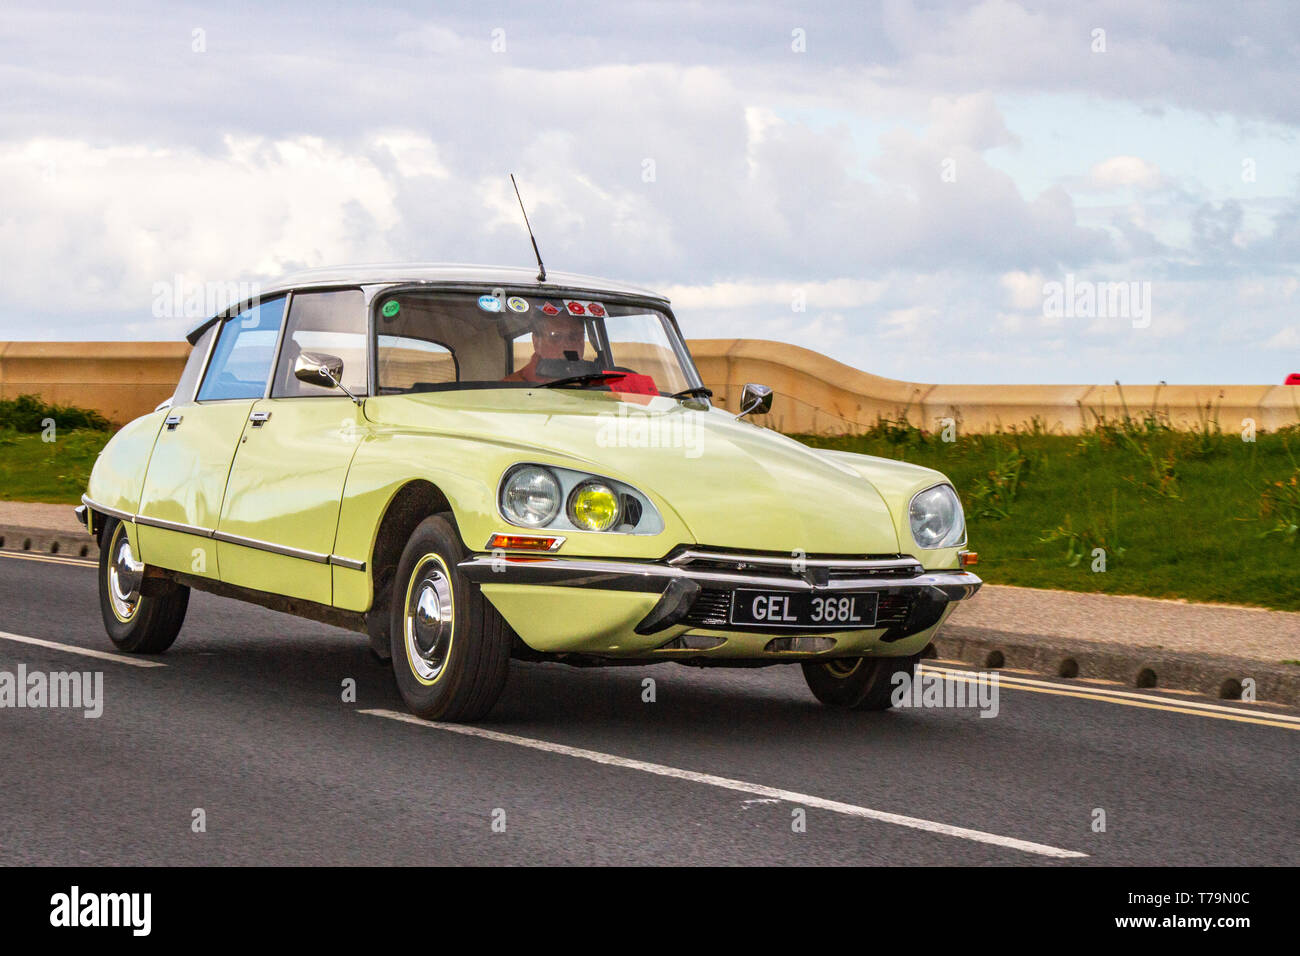 1972 70s yellow French Citroën DS at Cleveleys Spring Car Show at Jubilee Gardens in 2019. A new location for foreign Classic cars, veteran, retro collectable, restored, cherished old timers, heritage event, vintage, automobiles Stock Photo